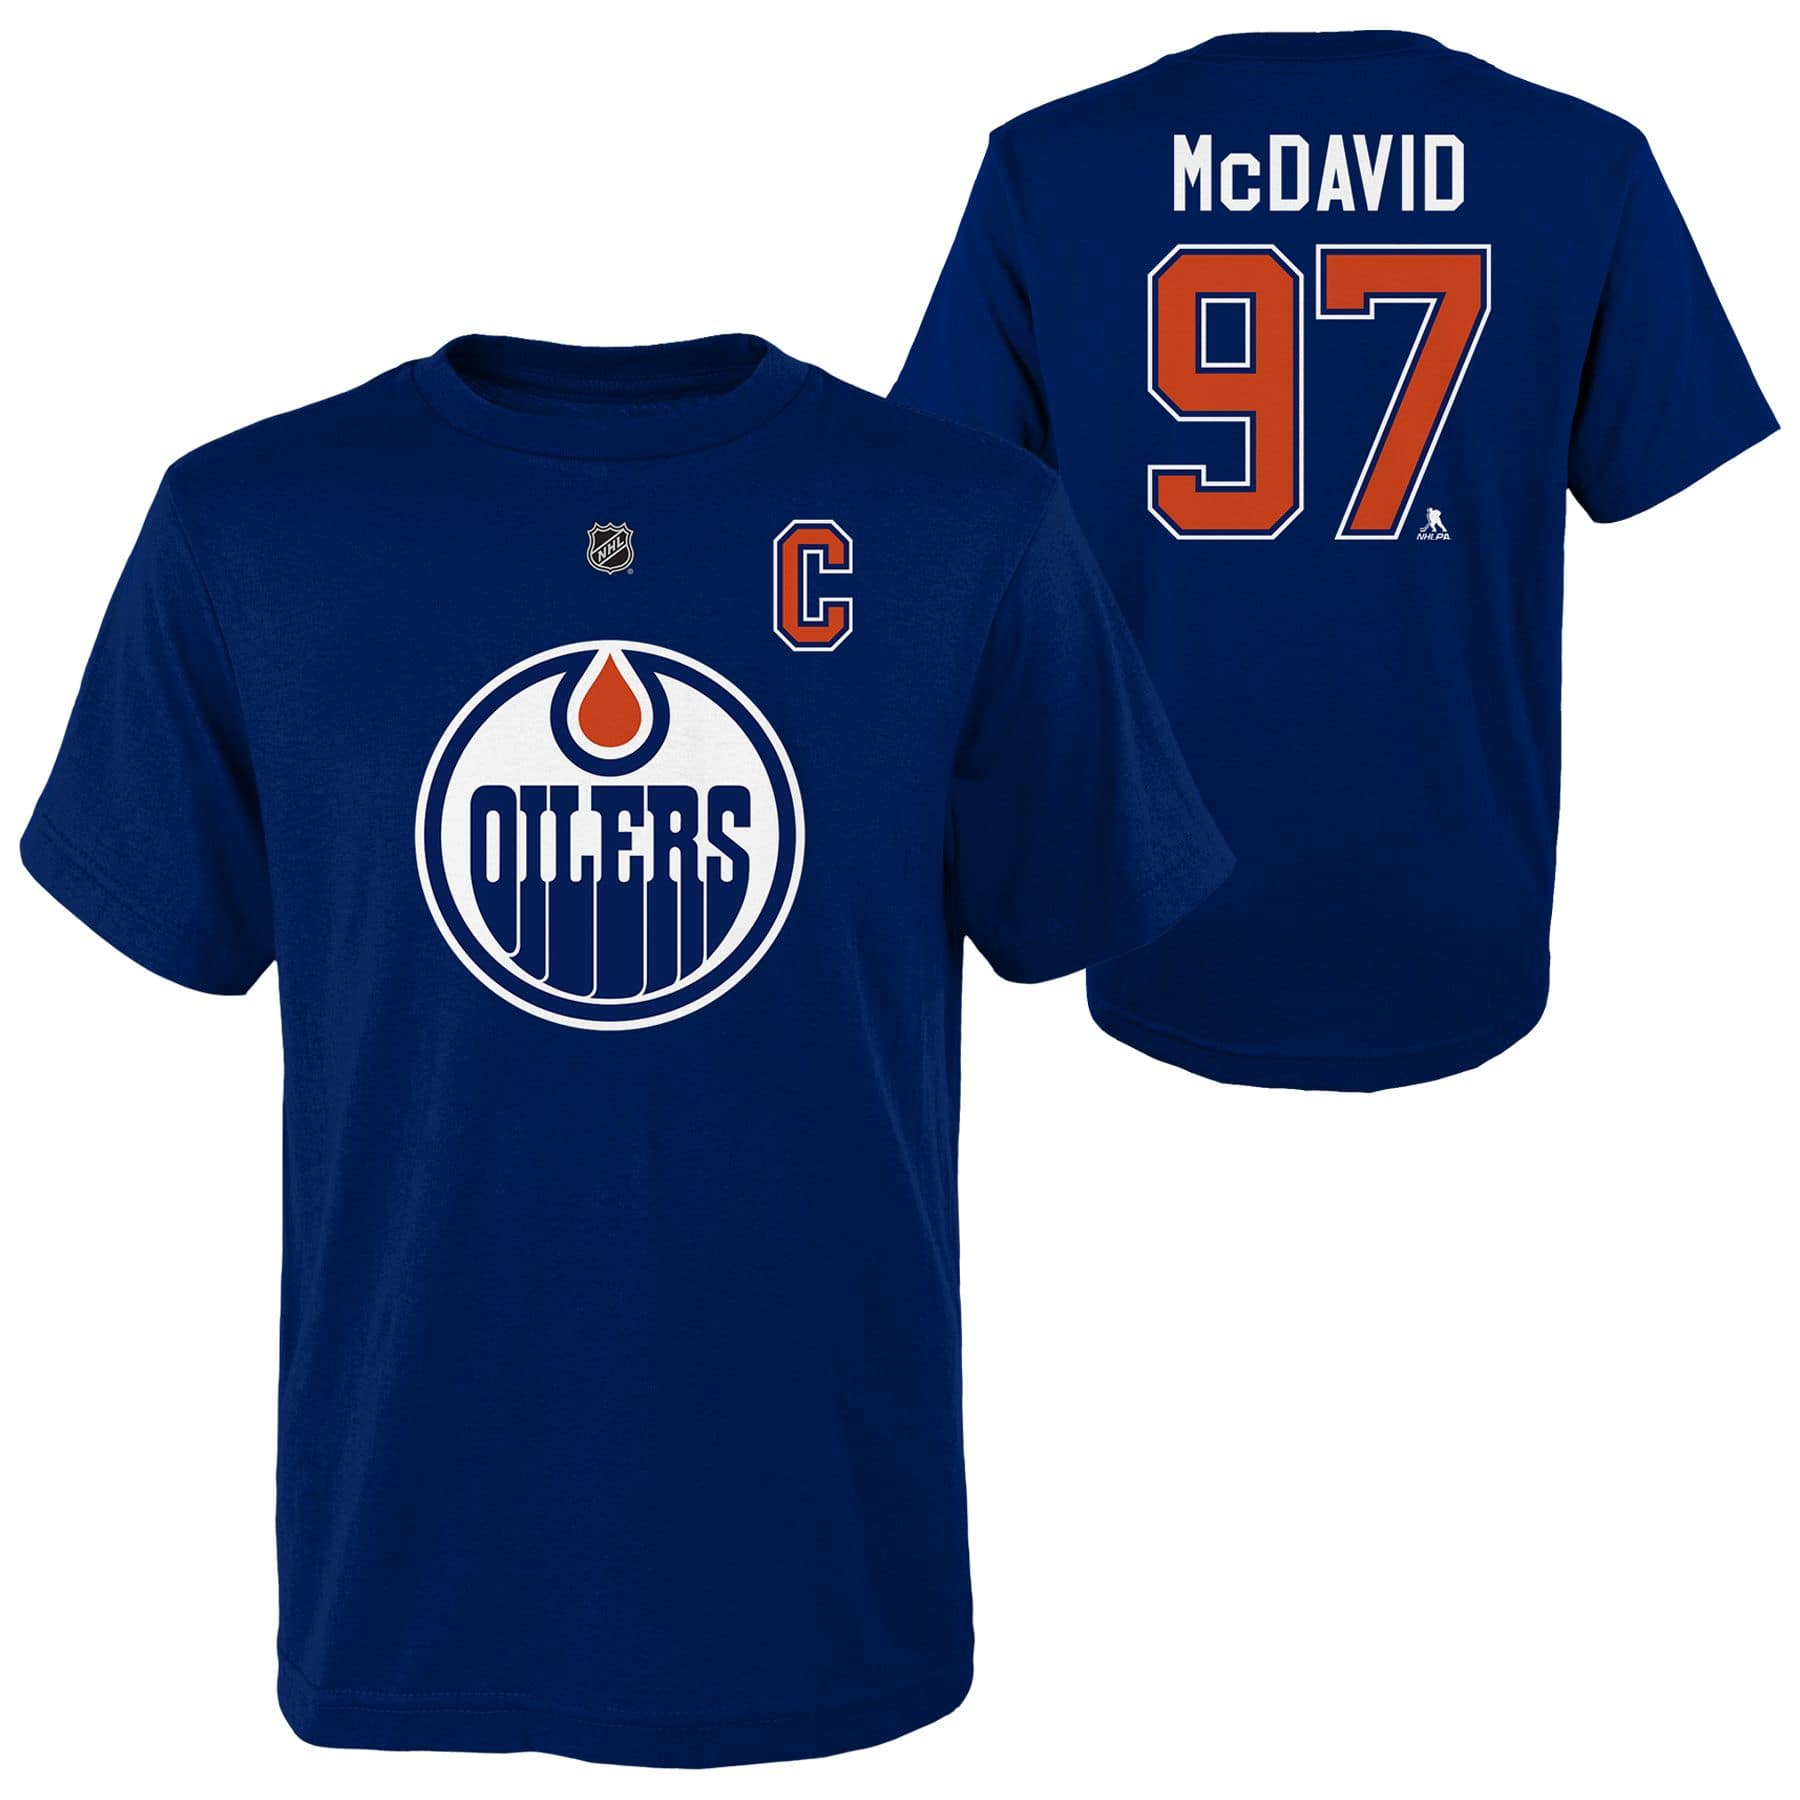  Connor McDavid Edmonton Oilers NHL Reebok Youth Blue Replica  Hockey Jersey (Youth Large/X-Large) : Sports & Outdoors